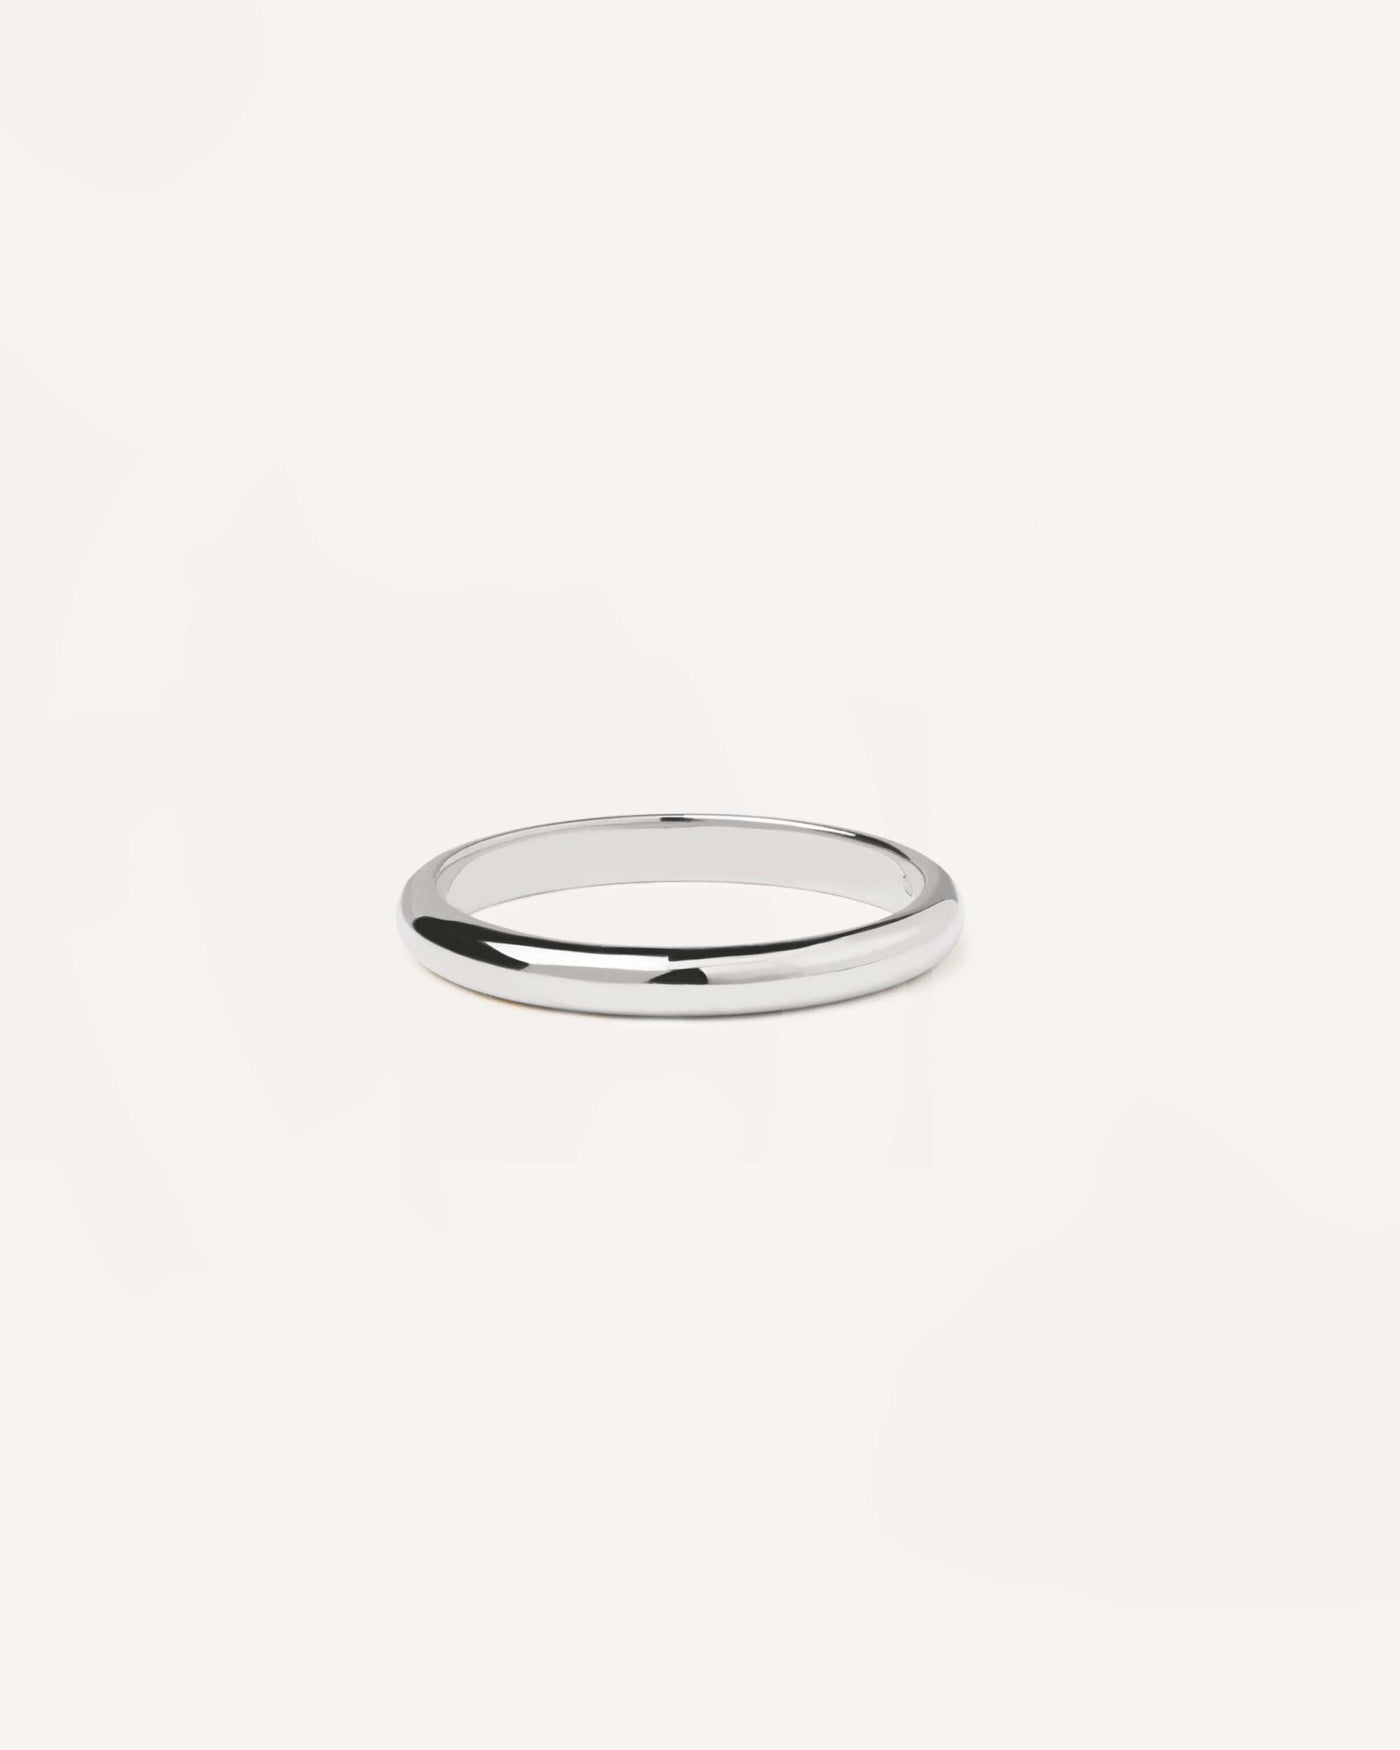 2023 Selection | White Gold Bold Ring. 18K white gold plain band ring. Get the latest arrival from PDPAOLA. Place your order safely and get this Best Seller. Free Shipping.